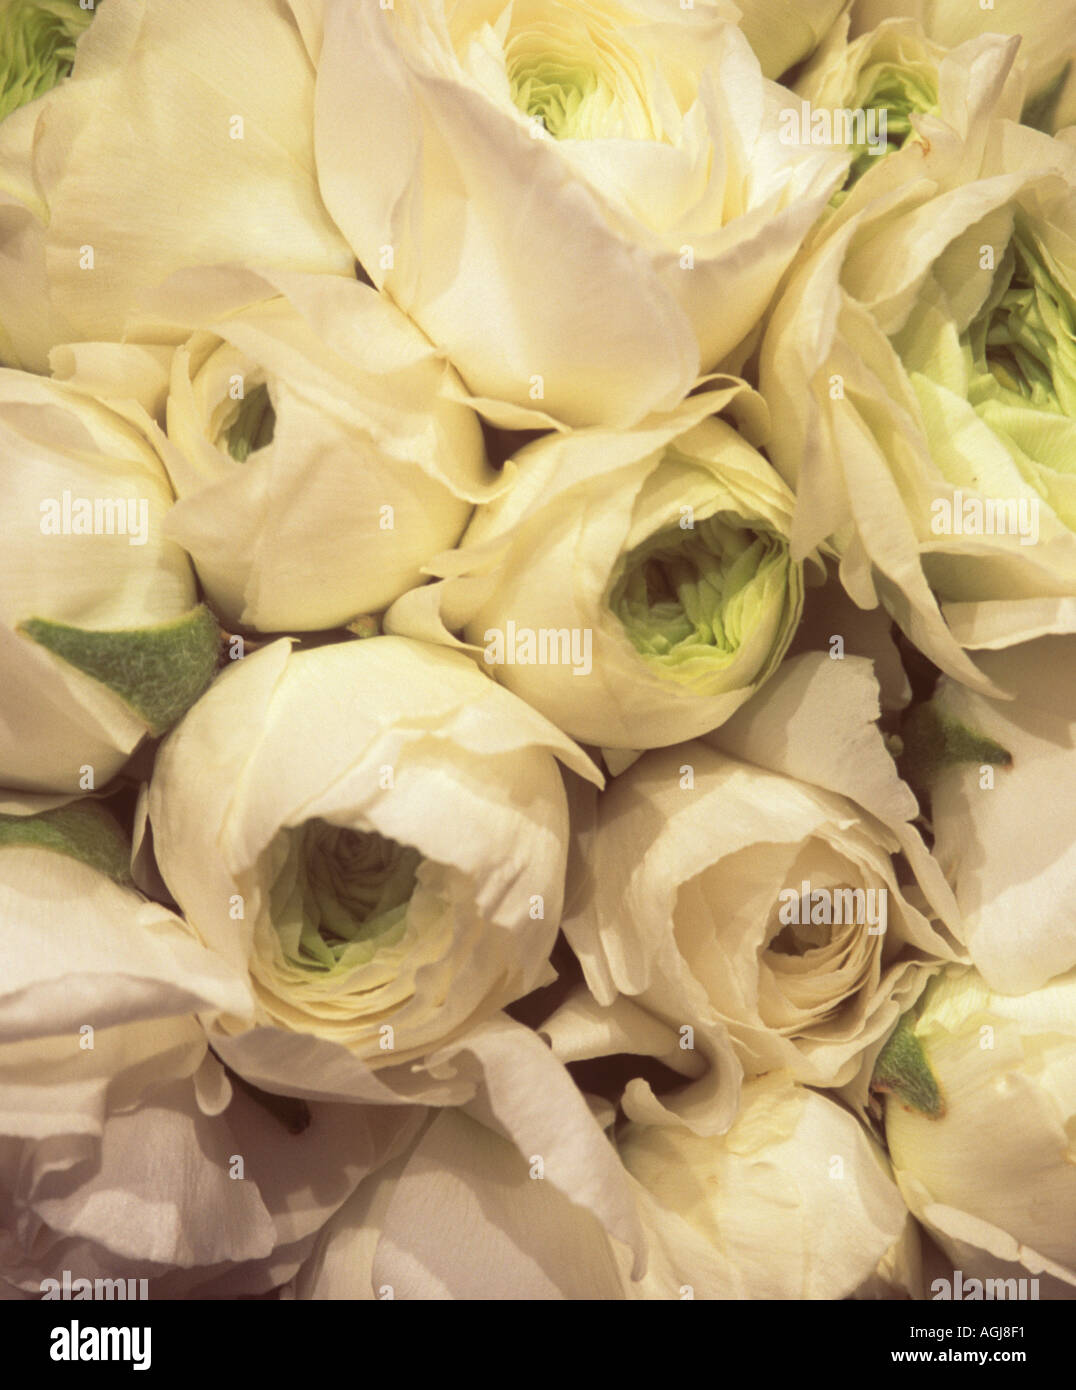 Bunch of white ranunculus from above Stock Photo